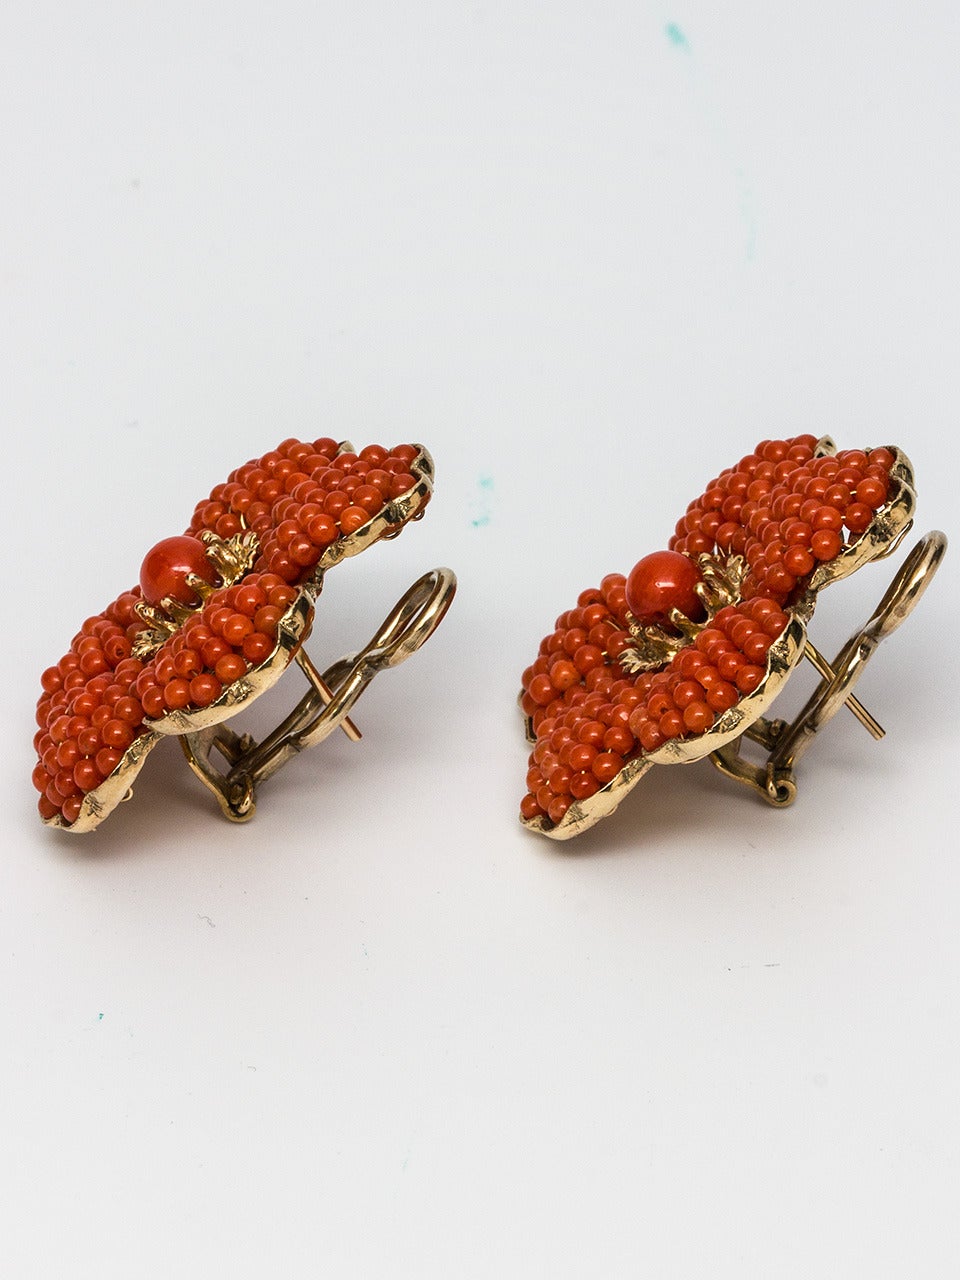 Yellow Gold and Coral Flower Earrings. Coral beads strung into petals surrounding a 5mm coral center encased within scalloped gold edges. The back of the earring features a nicely pierced design. Post and clip back closure. Very retro and beautiful